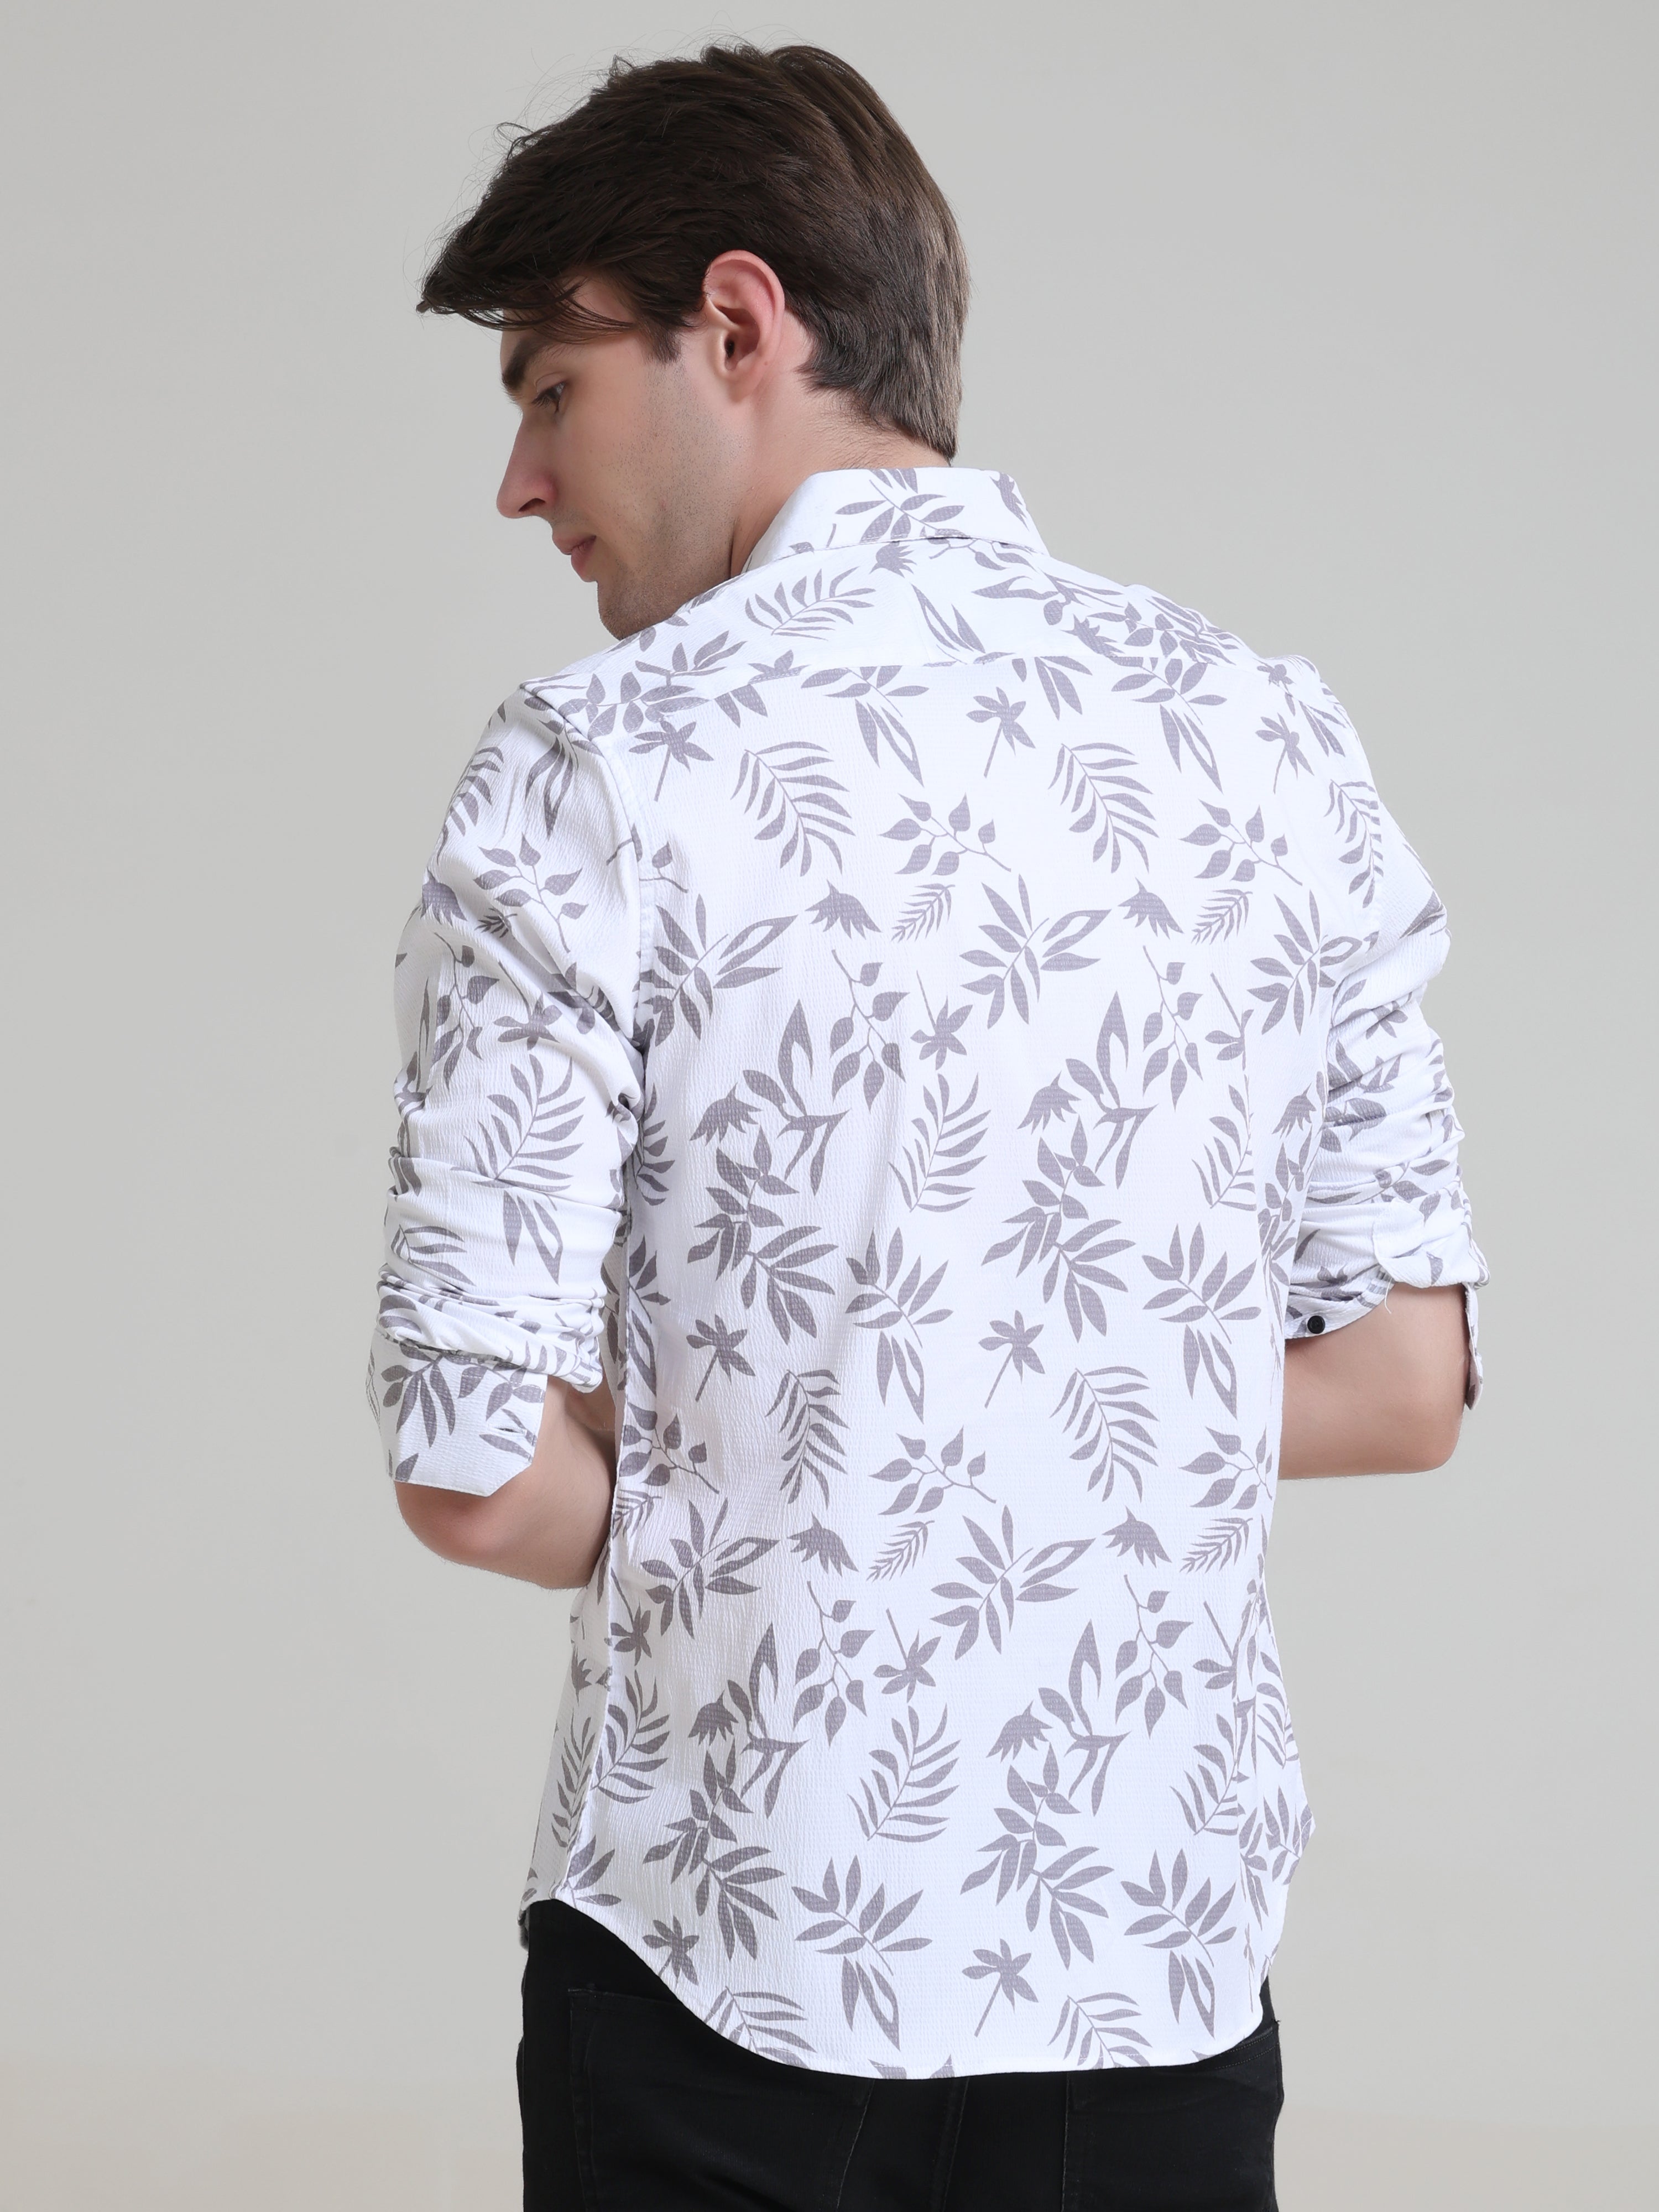 Buy Latest Cedar Leafy Printed Brown Shirt For Men OnlineRs. 1359.00